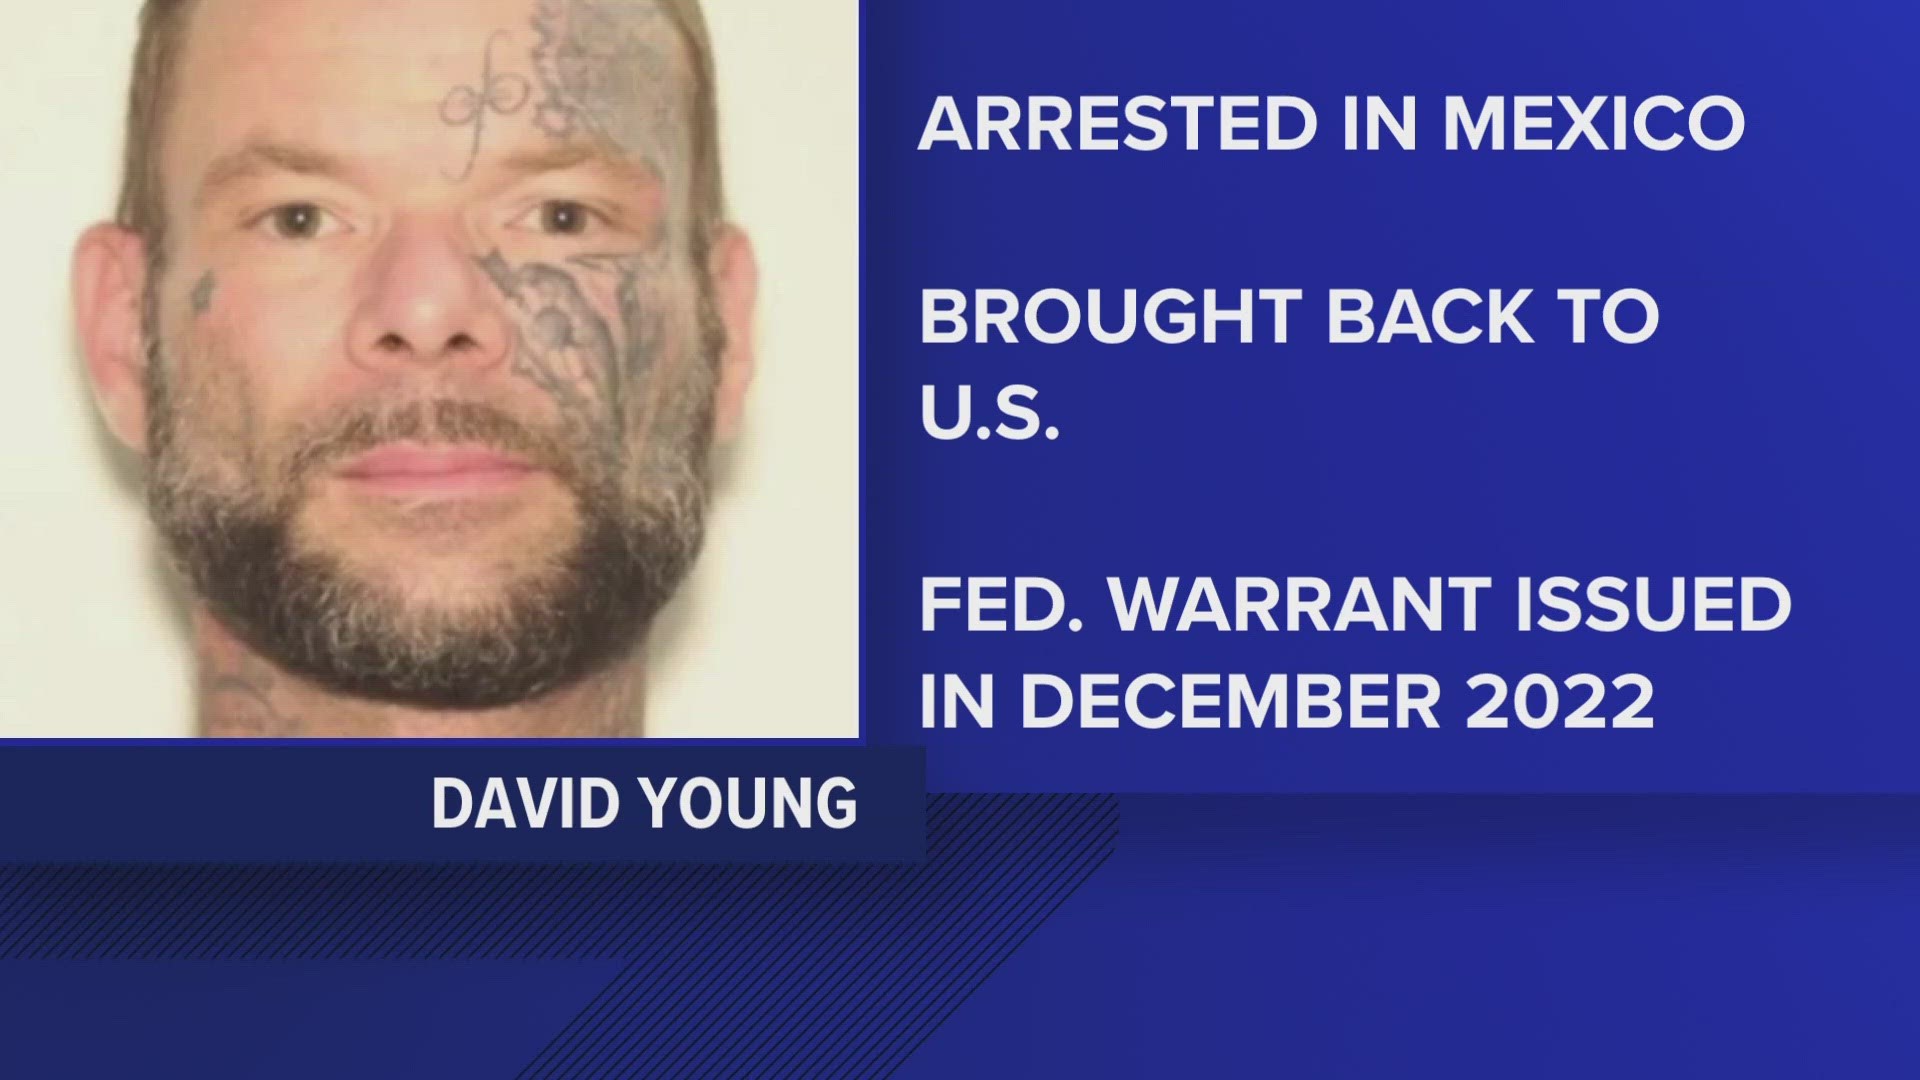 David "Khaos" Young is now in custody, according to the FBI. He is a member of the white supremacist gang Ghost Face Gangsters.